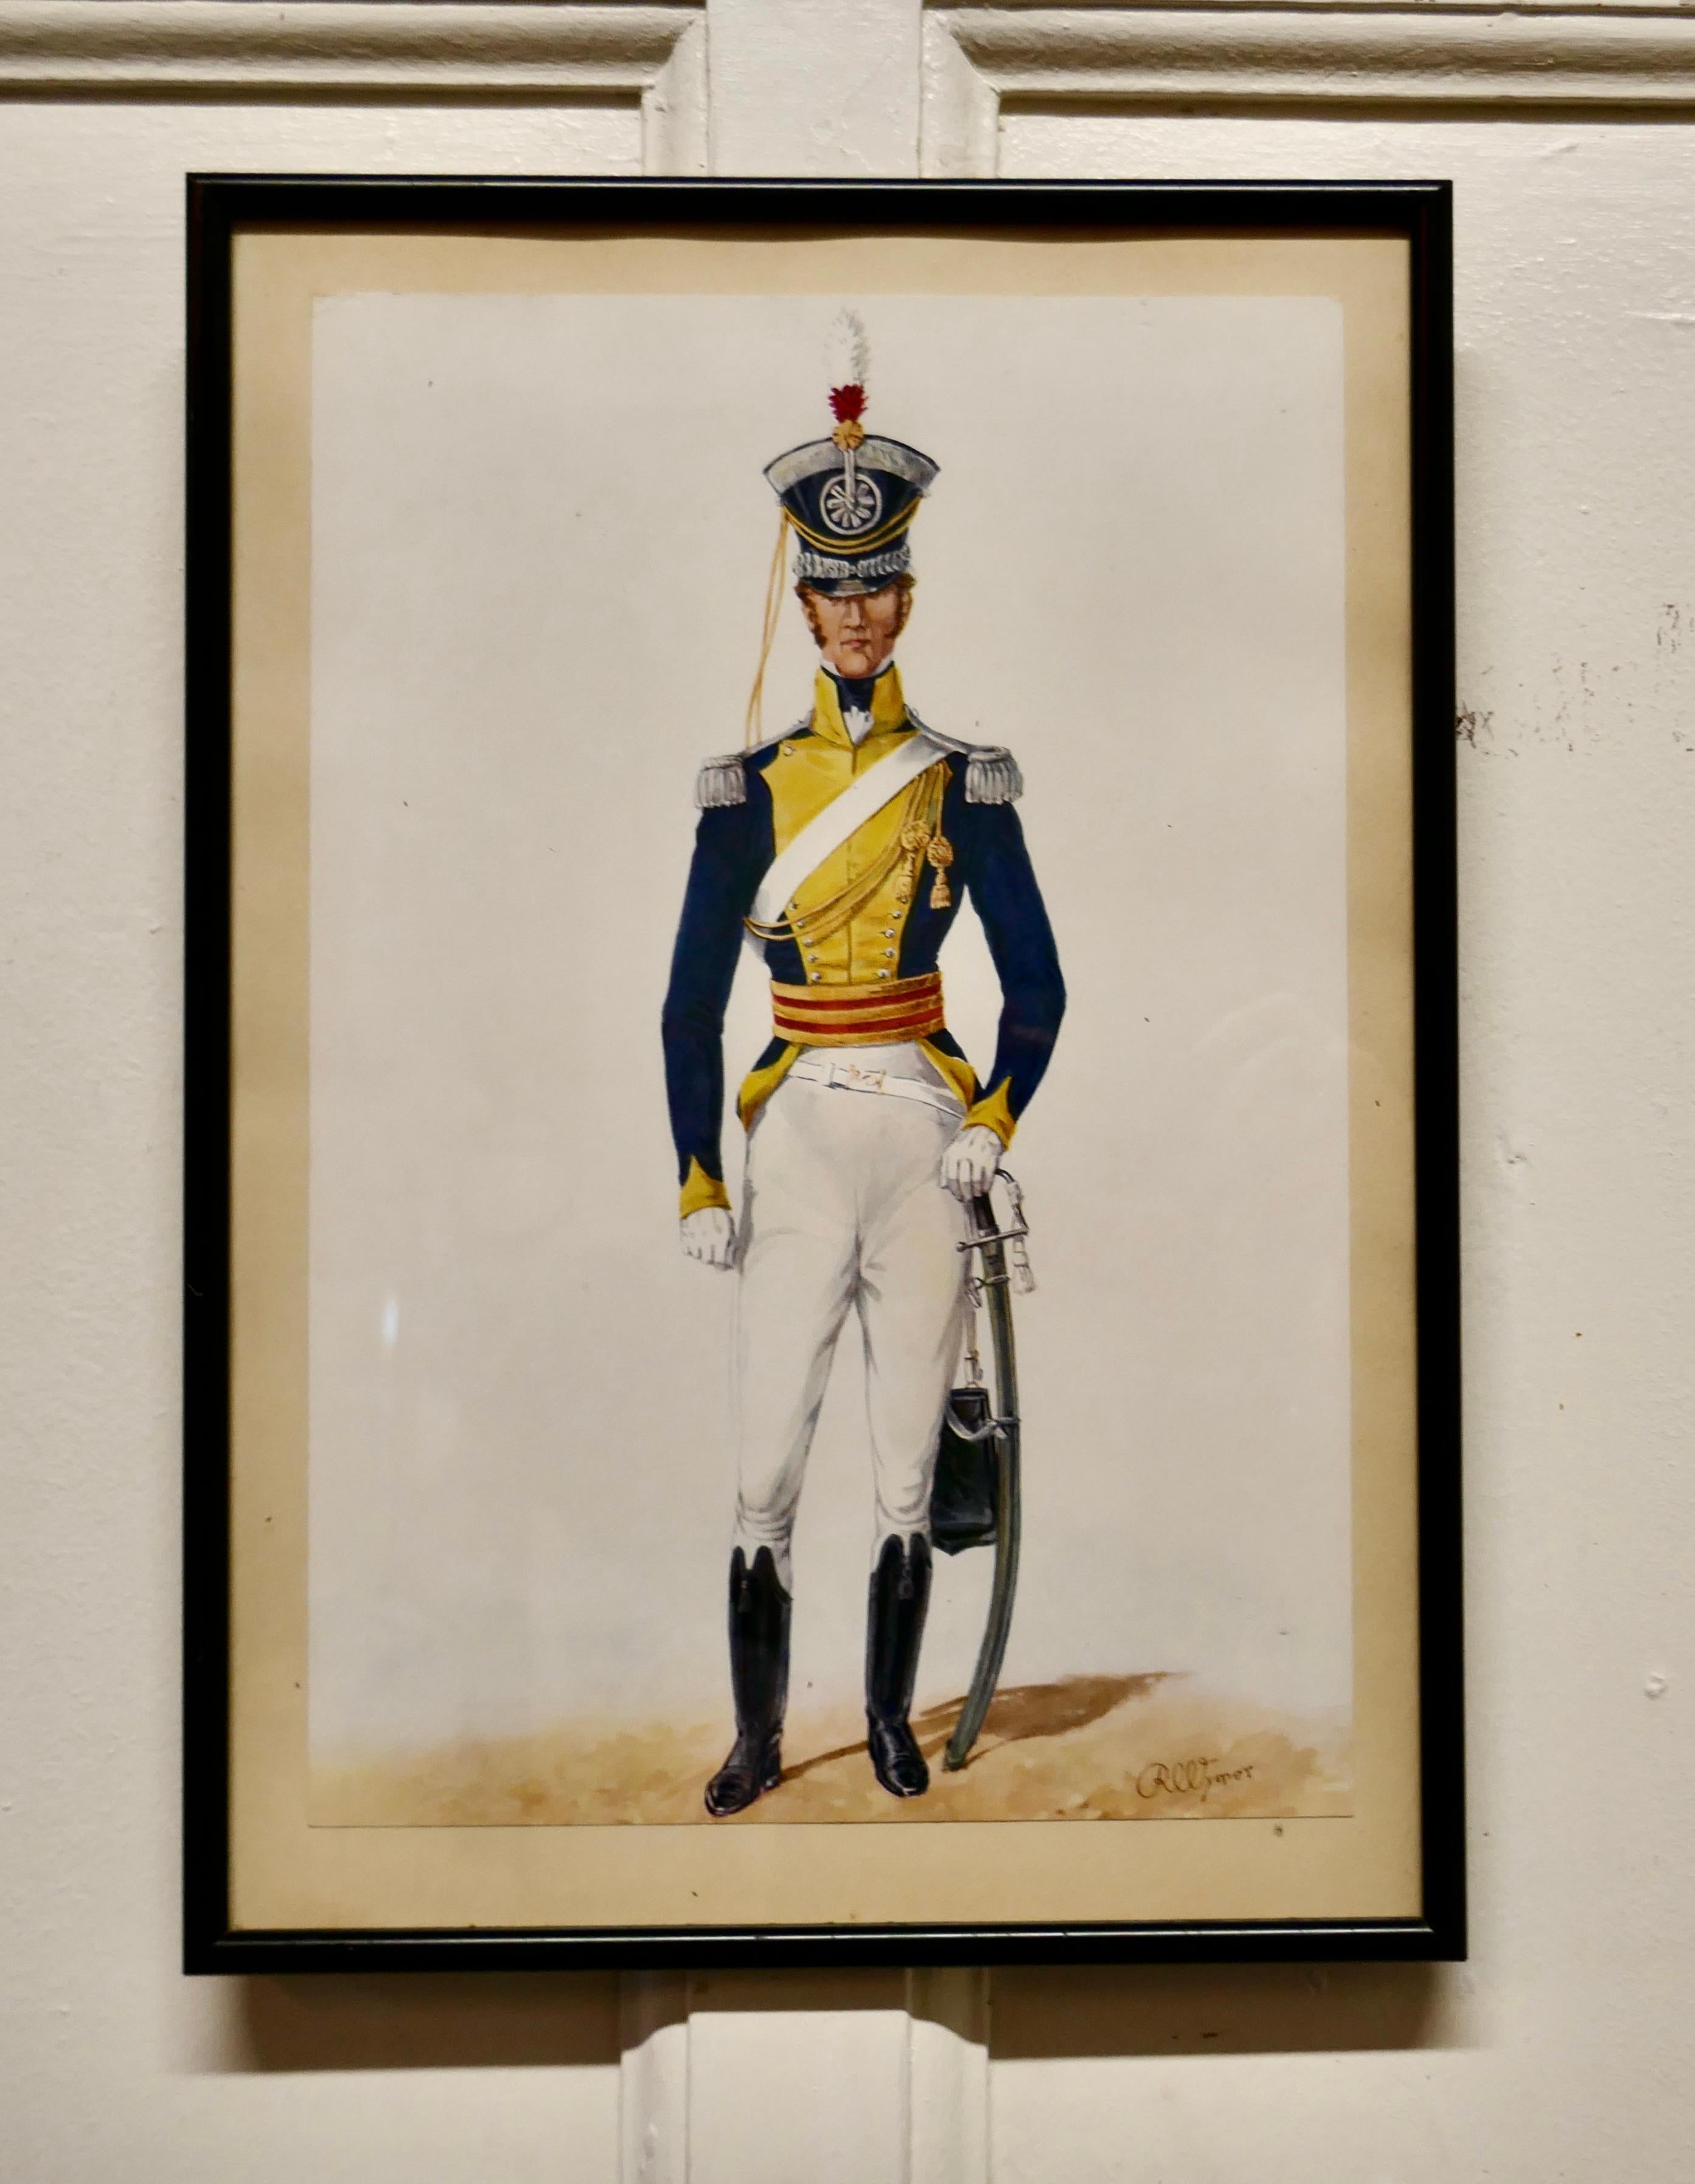 2 vanity fair pictures military Uniforms by Reginald Augustus Wymer (1849-1935)
The pictures are framed and have signatures, they are in nice condition for their age, an interesting pair with good colour
The pictures are 16” x 11”
AC87.